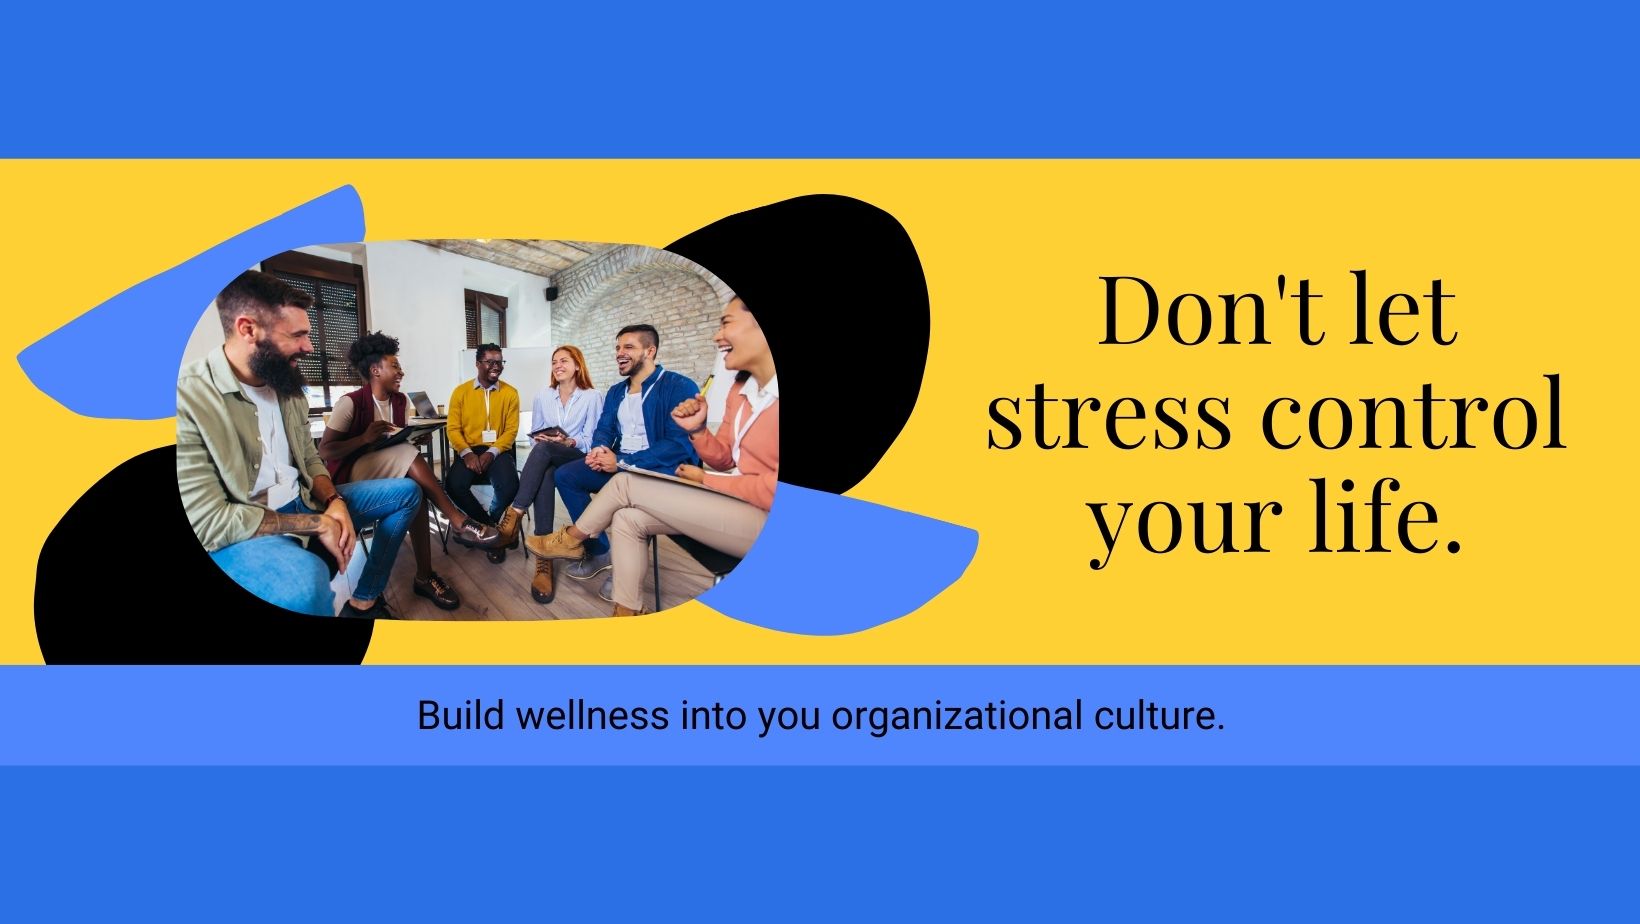 Build wellness into your corporate culture